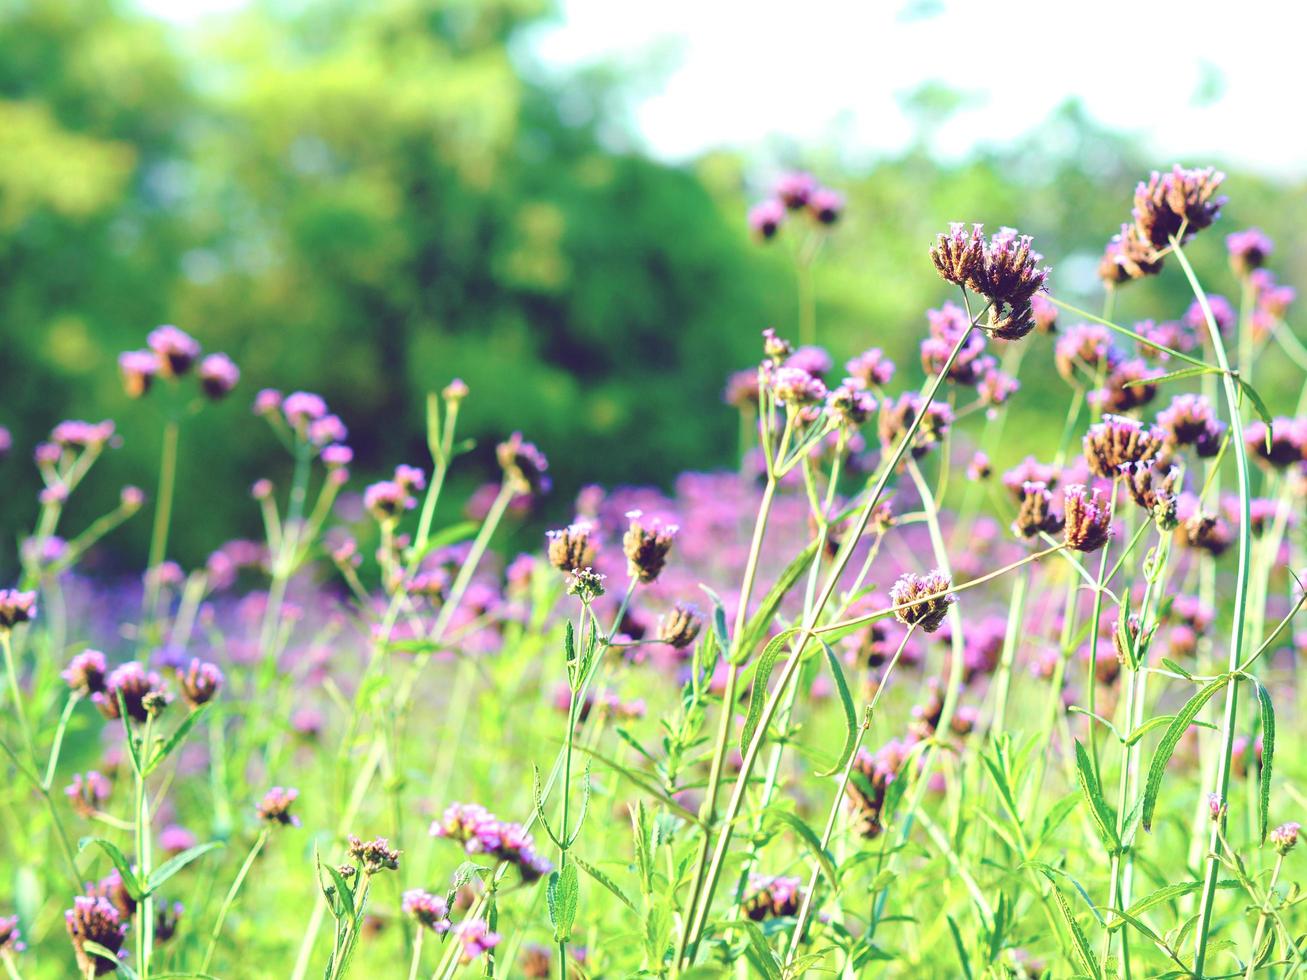 Closeup purple flower garden in natural fresh floral retro warm tone and the blur background photo